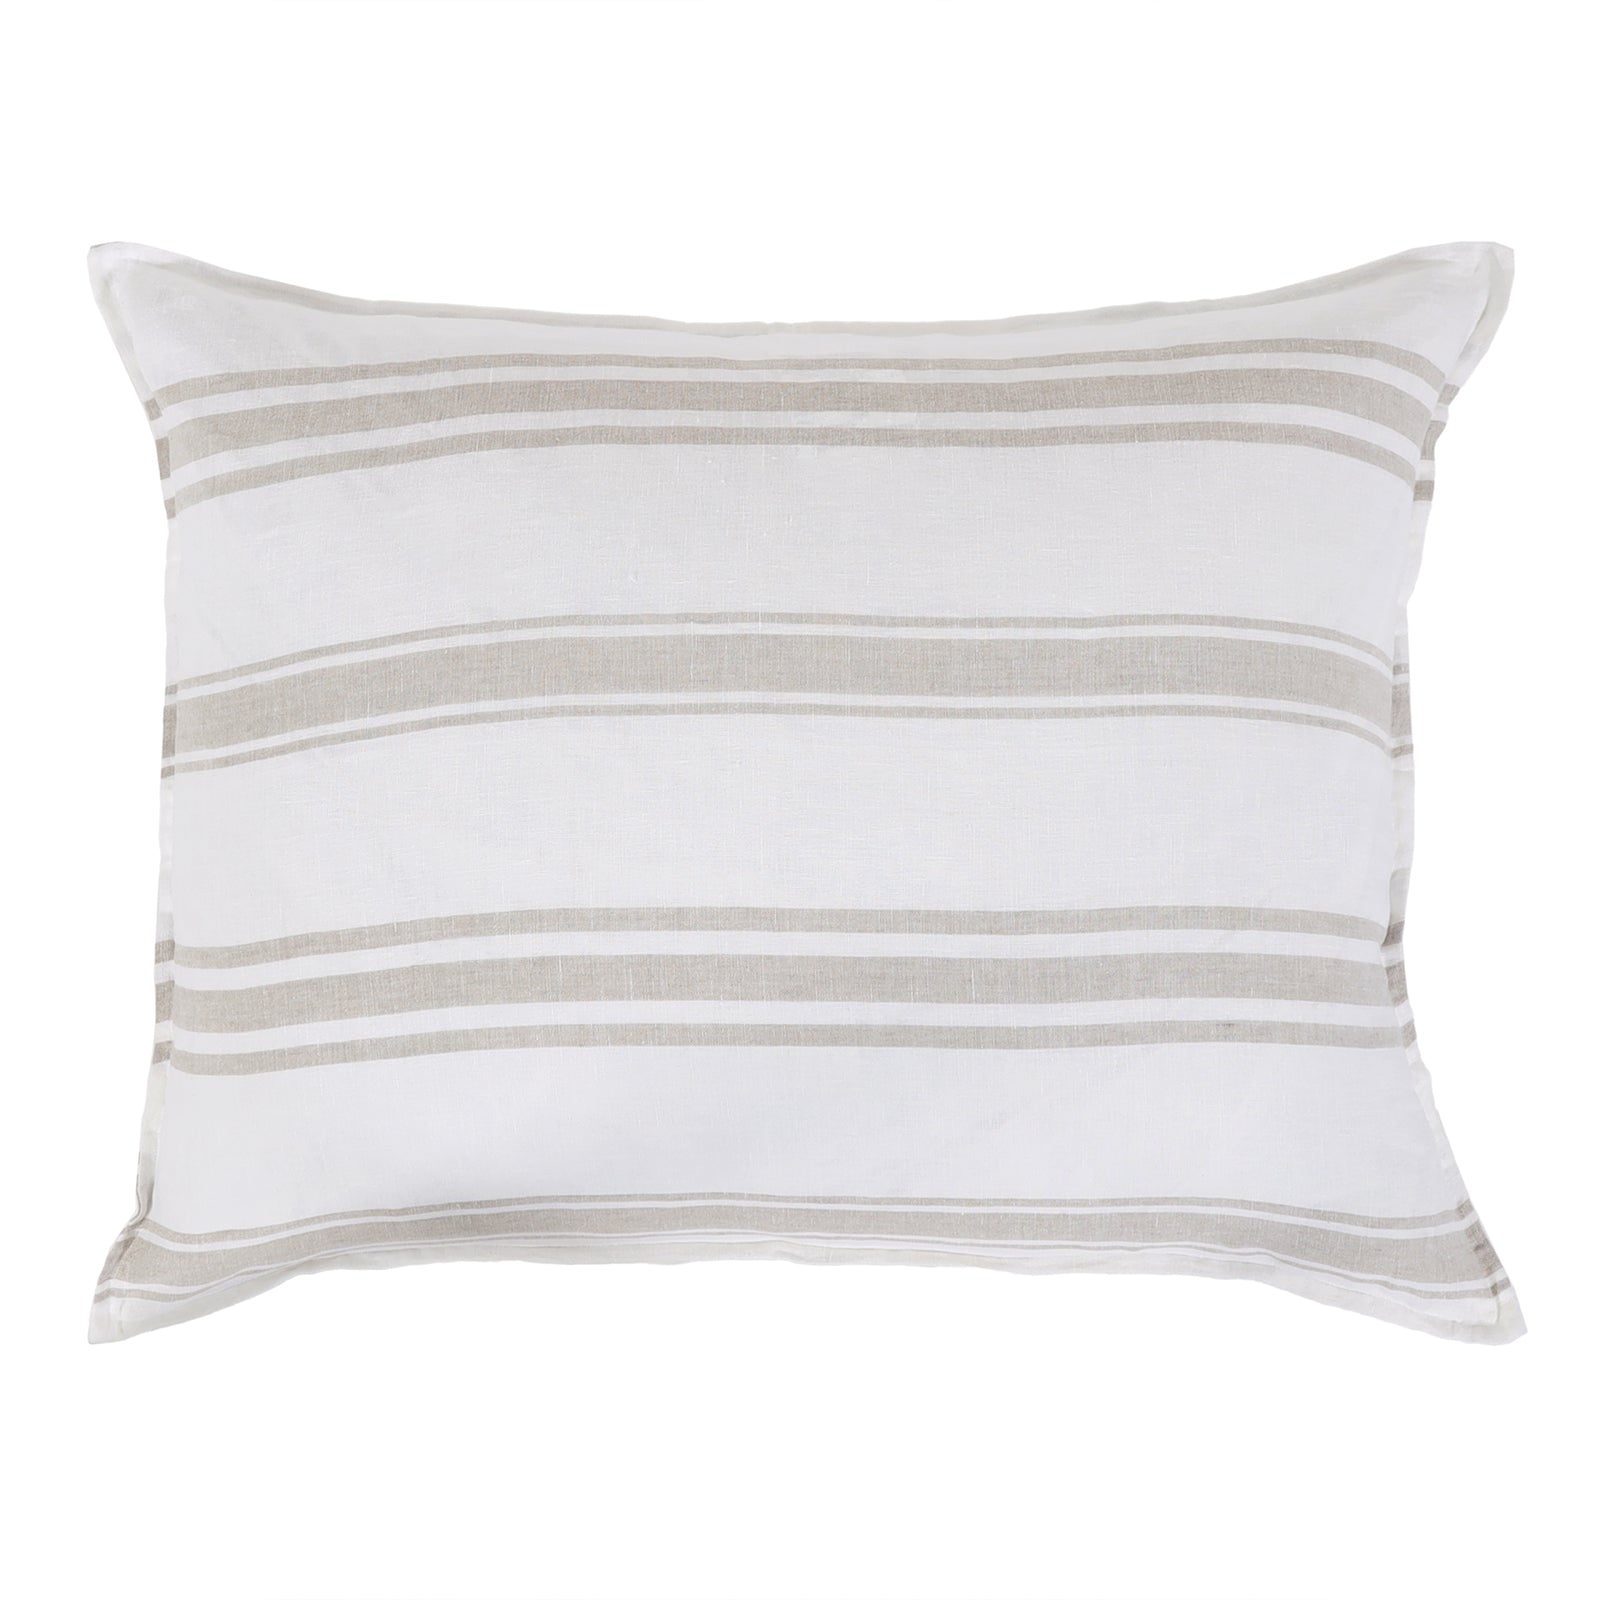 JACKSON BIG PILLOW WITH INSERT - 4 colors - pom pom at home